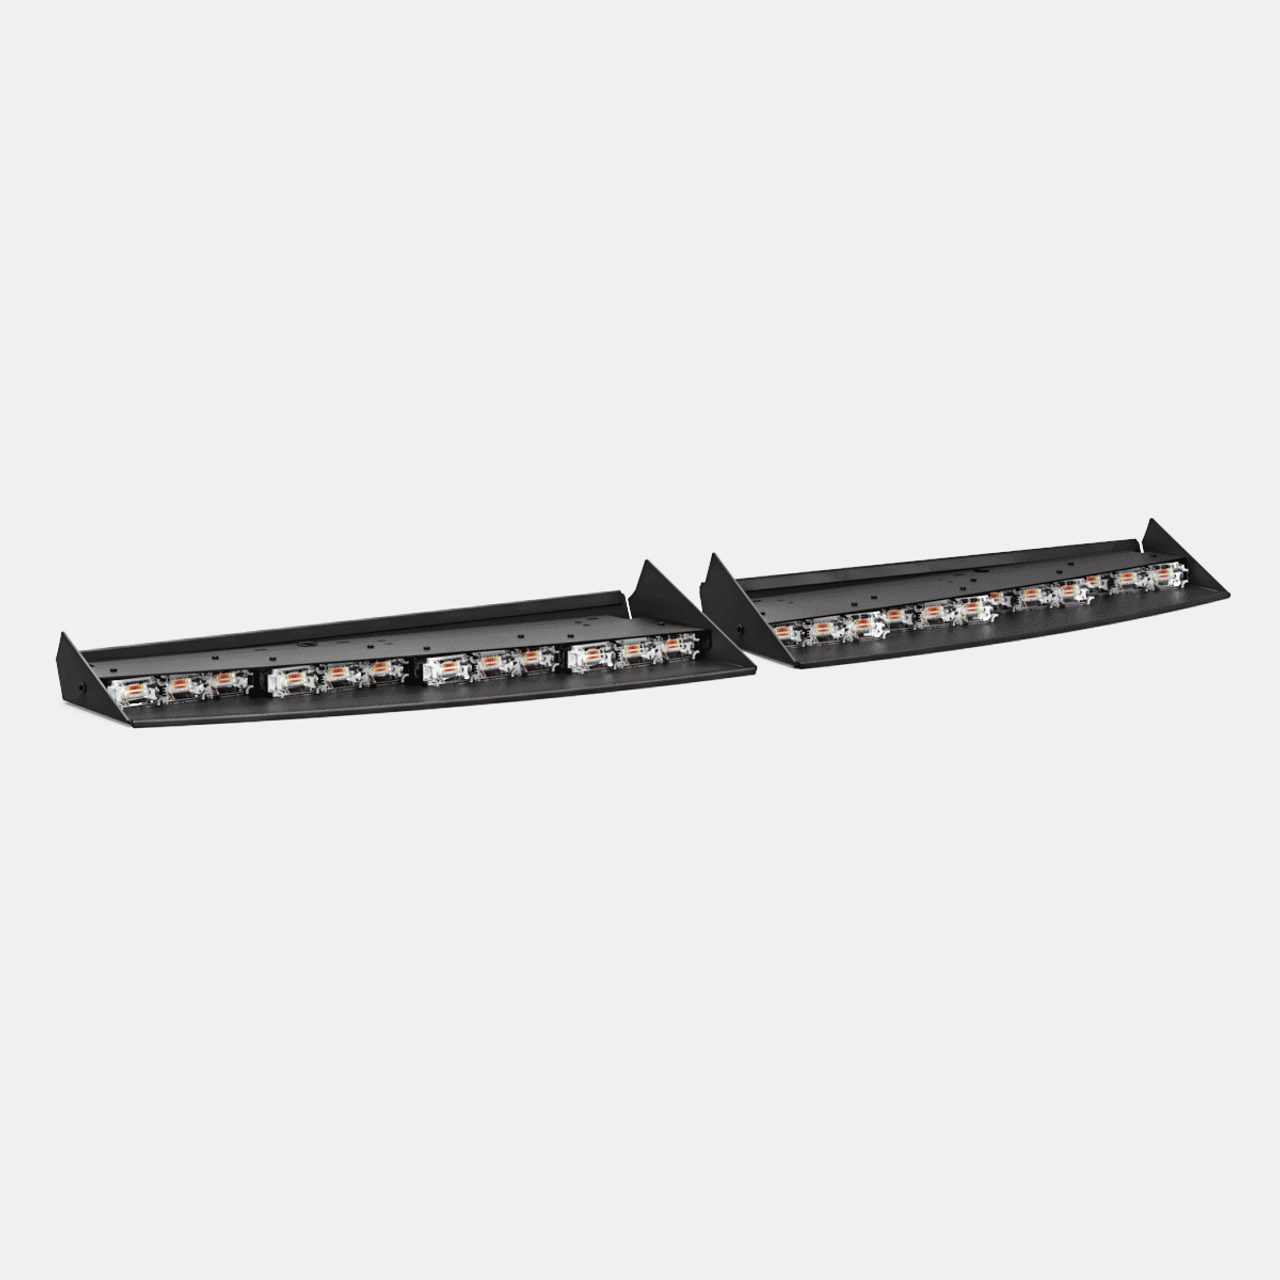 Feniex Q-1619-EXP-18-21 Quad, Ford Expedition, 2018-2021 Interior Light Bar, Front Facing, Four LED Colors Each Side (Red, Blue, White and Amber)